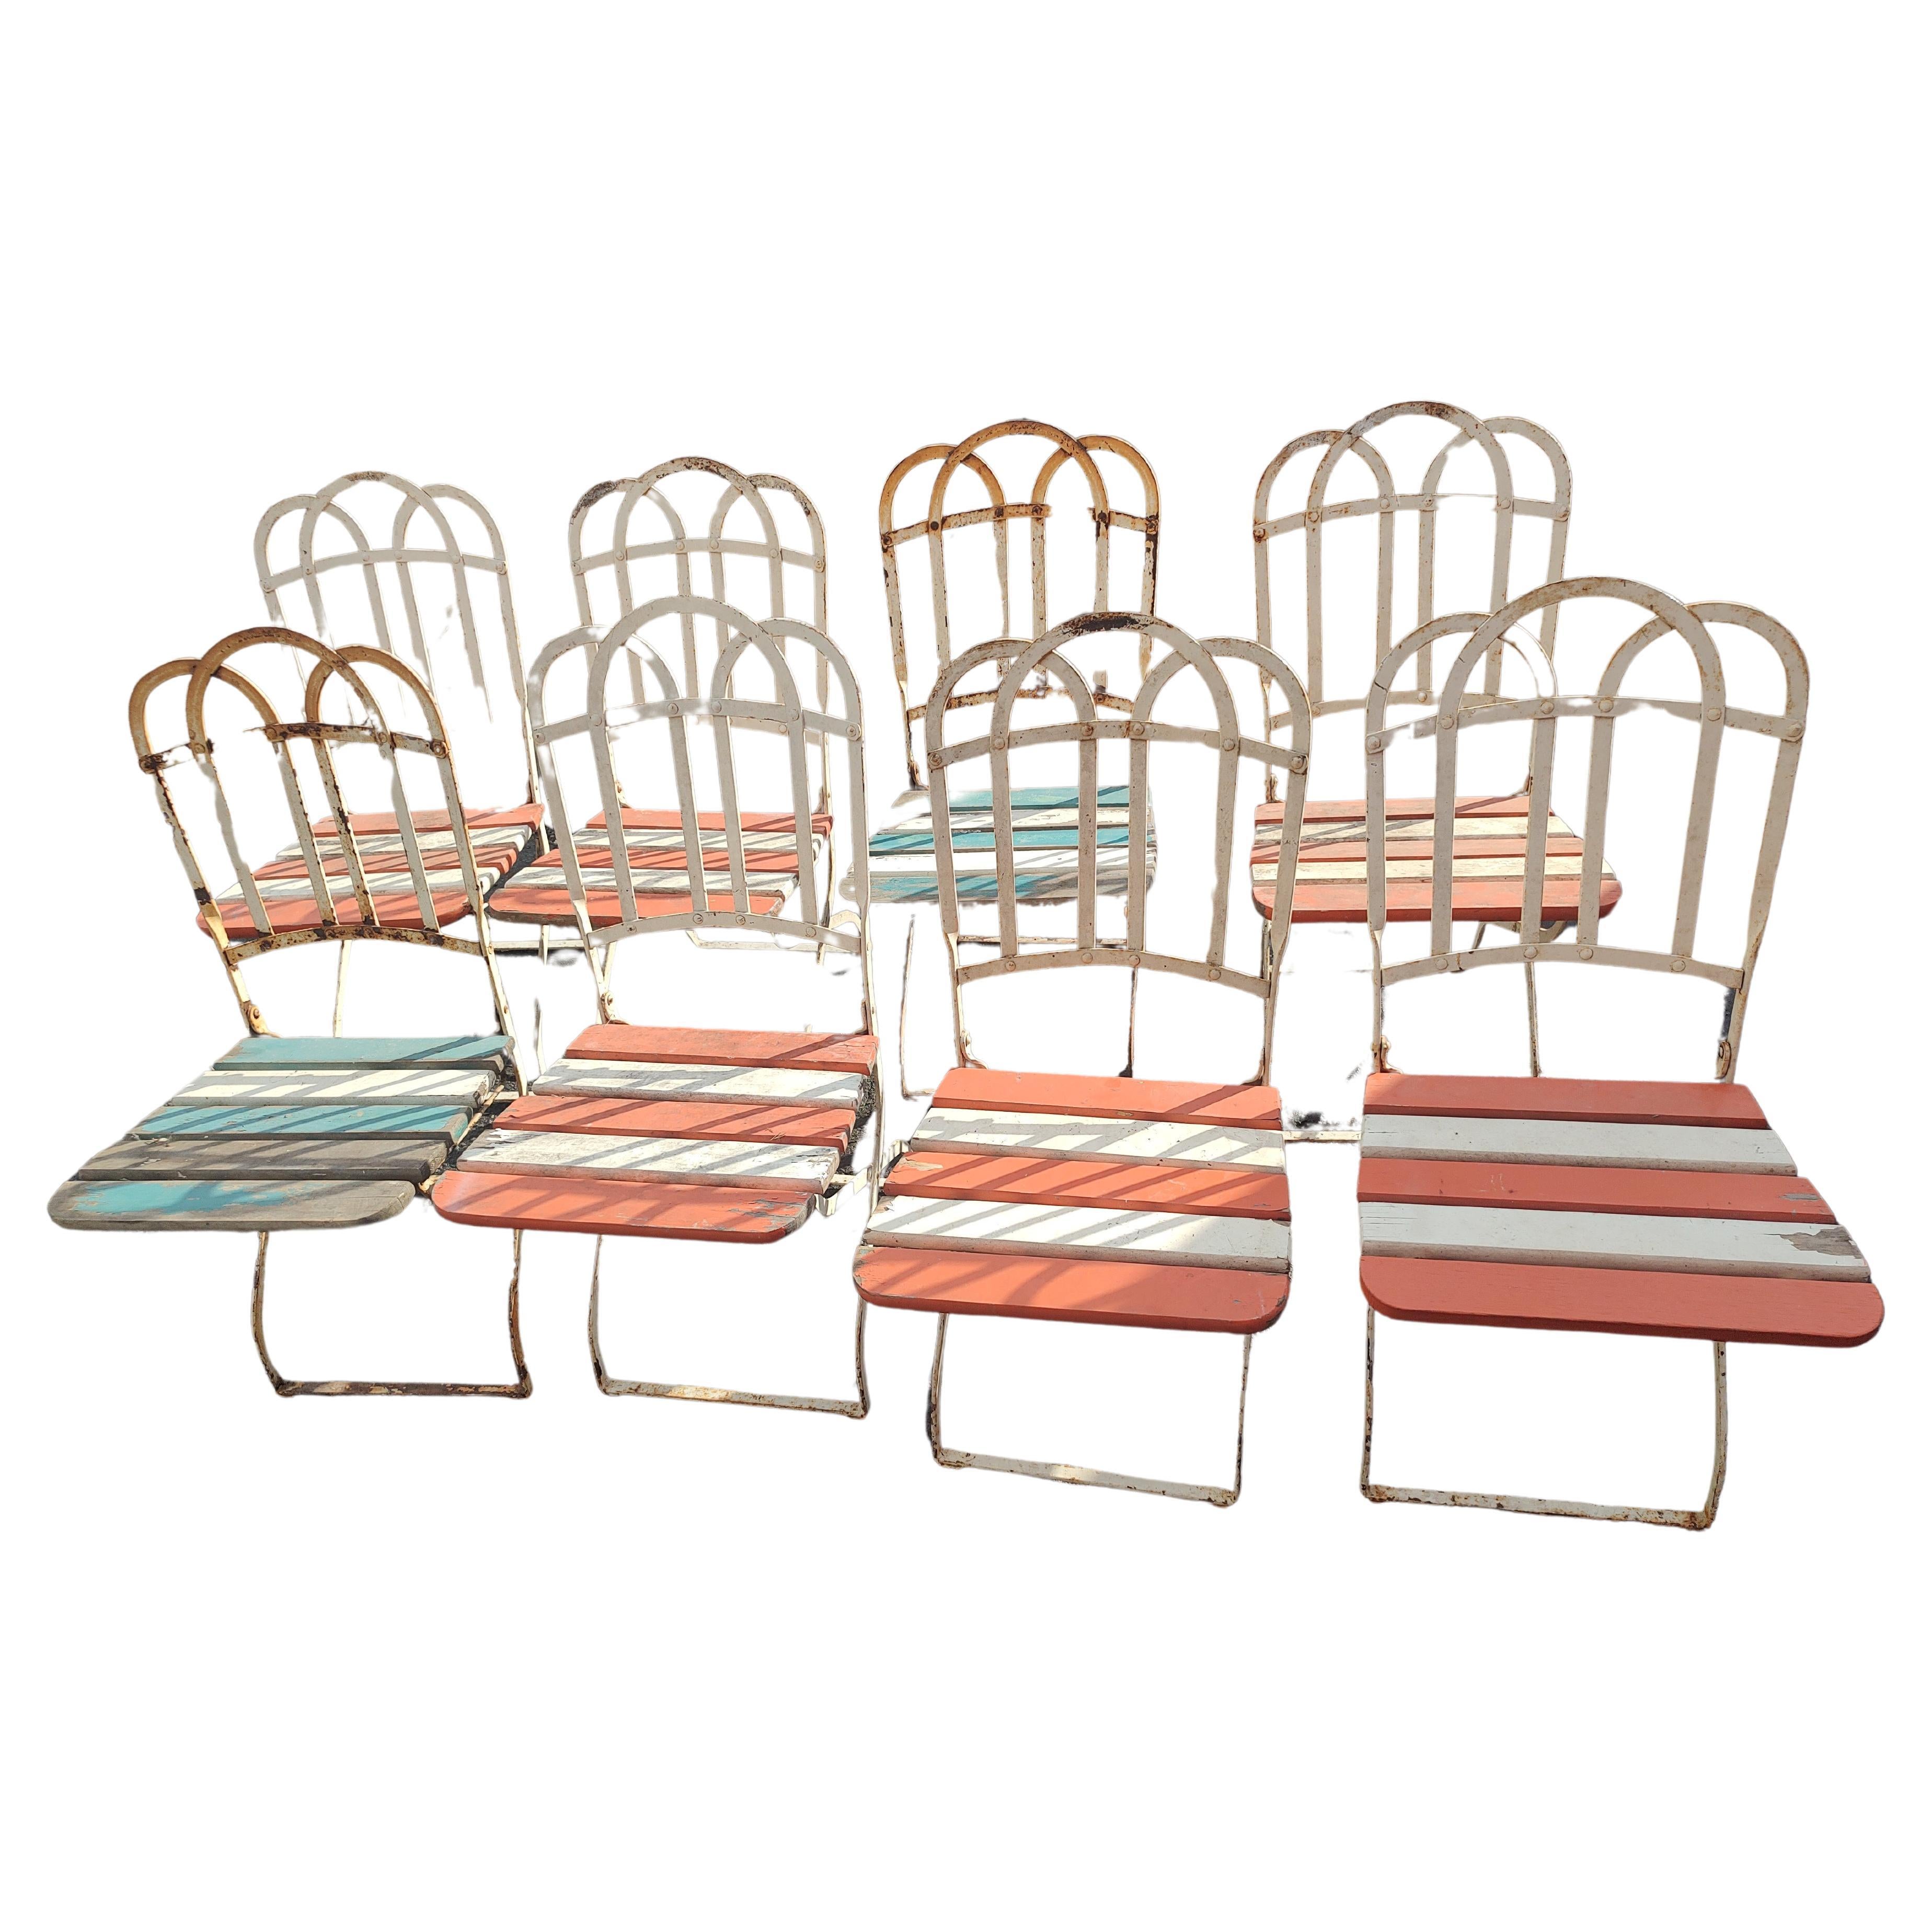 Art Deco Set of 8 French Fold-up Iron with Slatted Wood Cafe Garden Dining Chairs C1920 For Sale